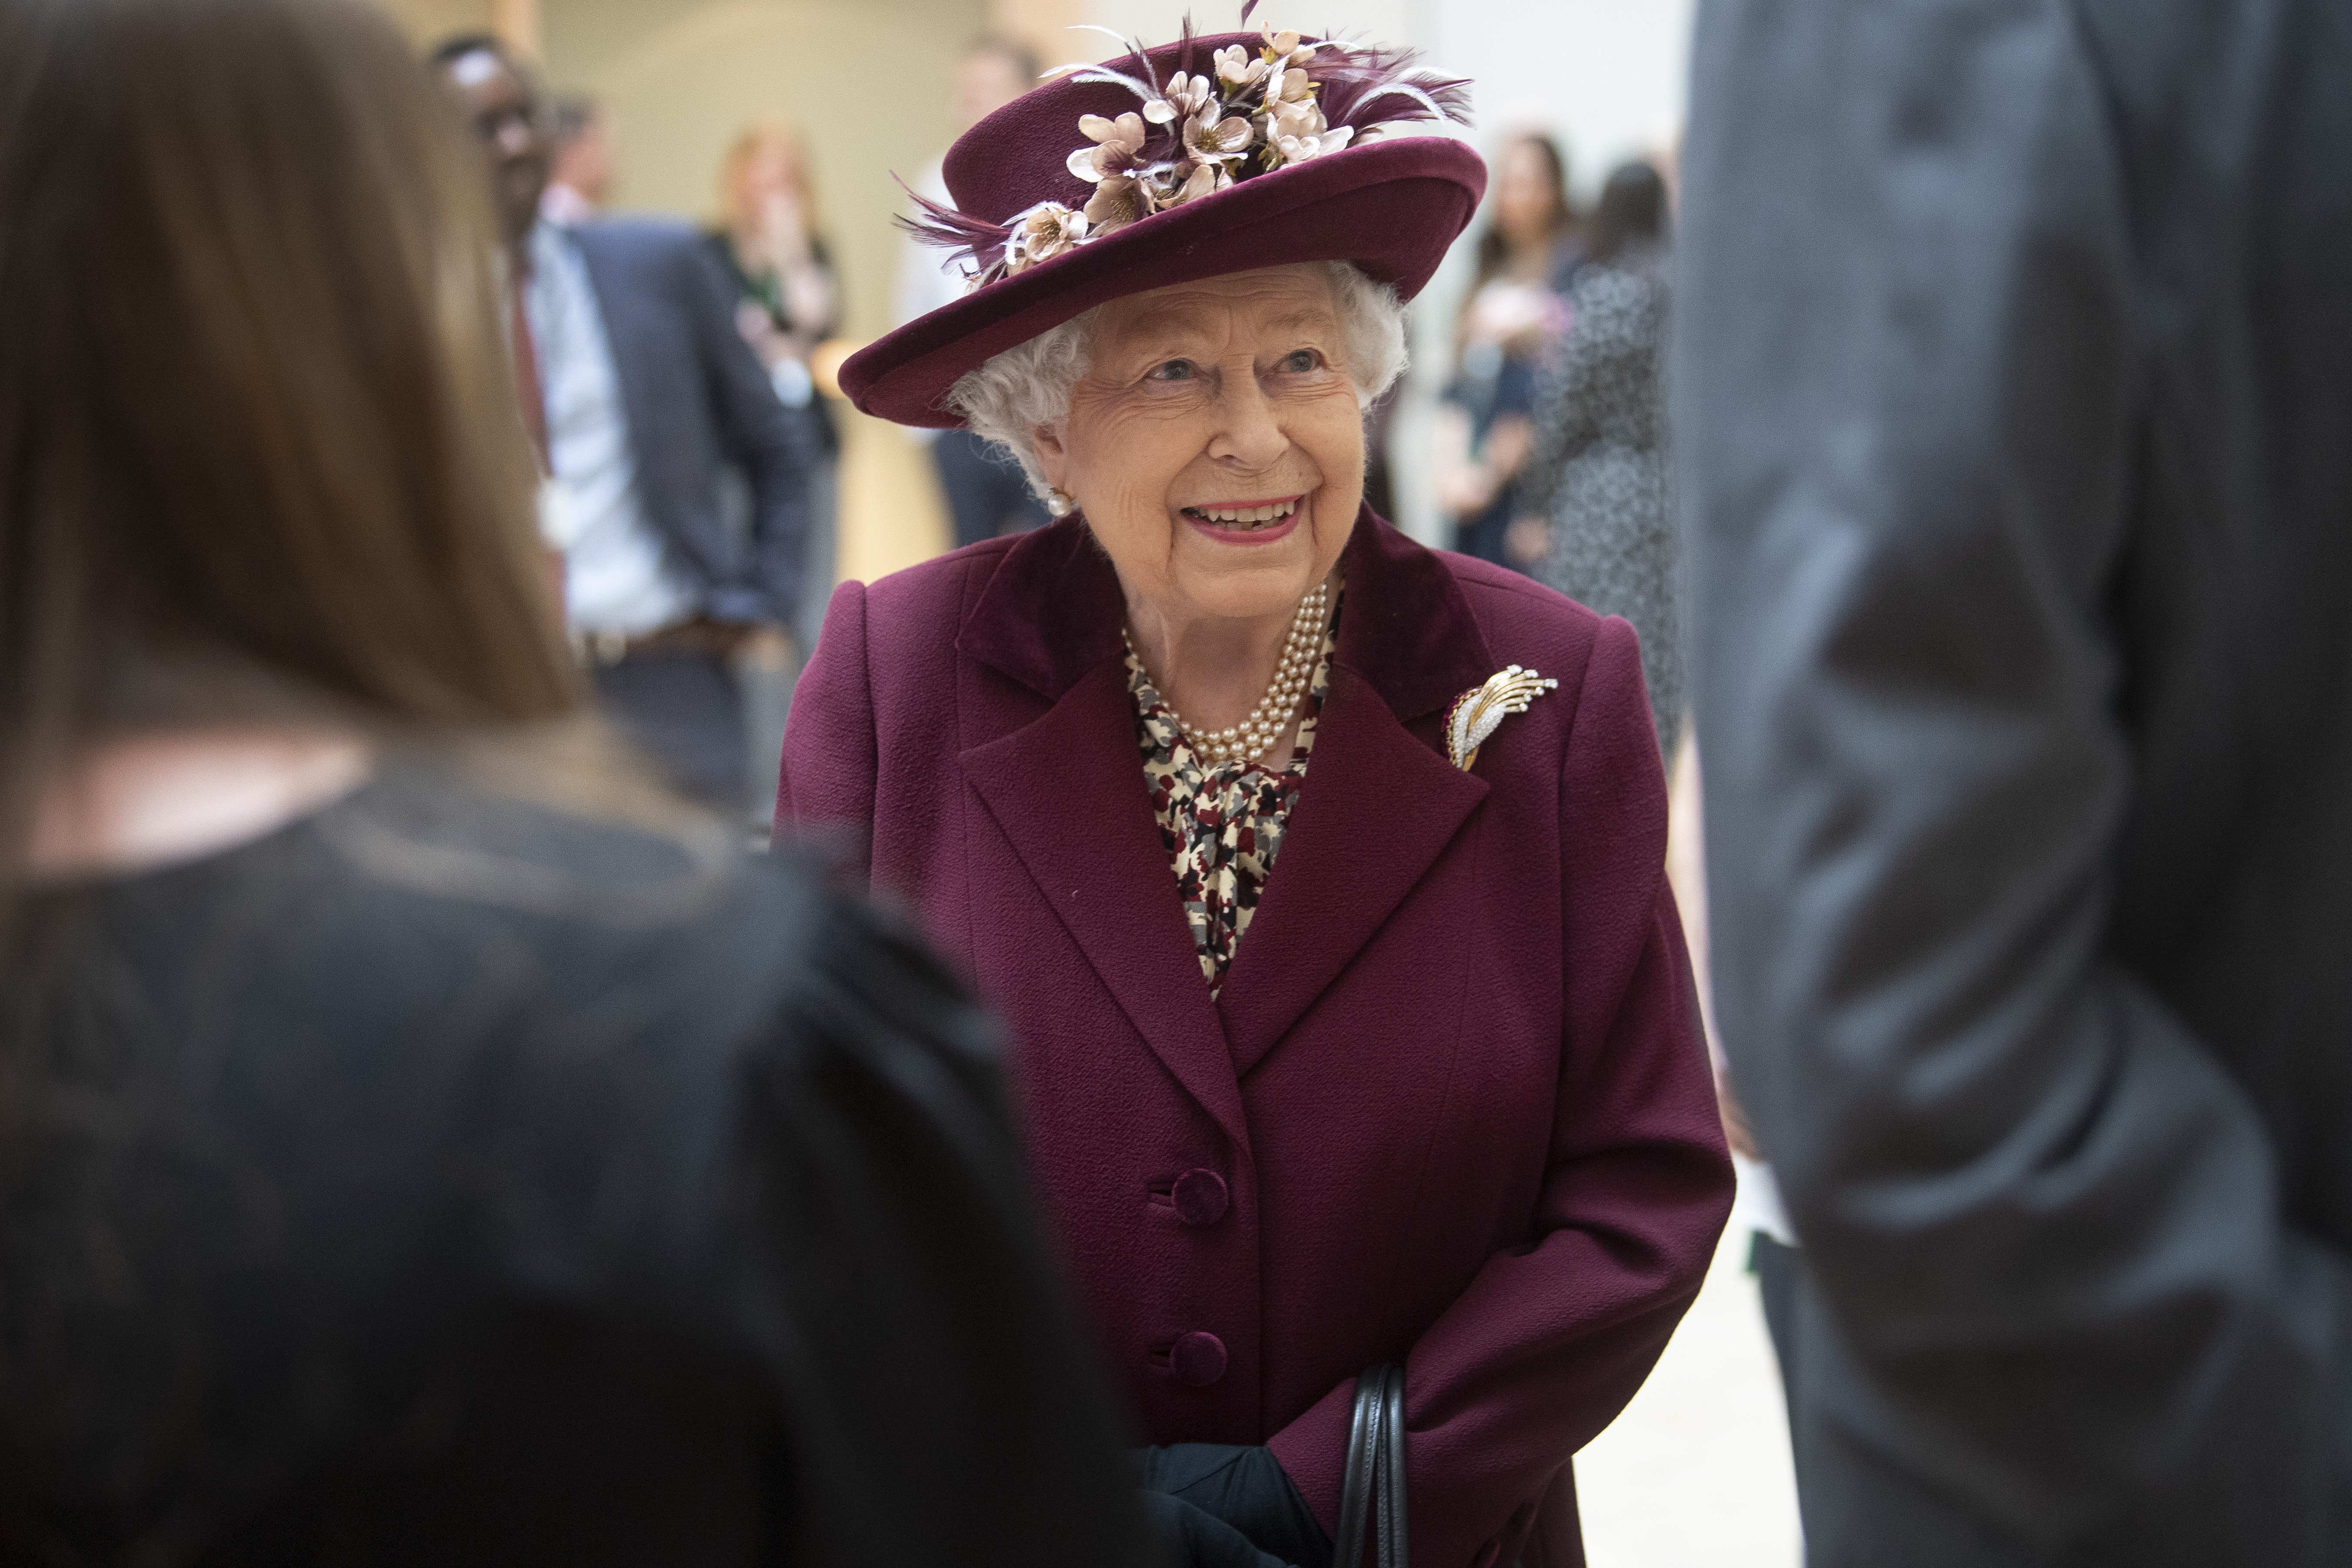 Queen Elizabeth II talking to MI5 officers during a visit to the headquarters of MI5 at Thames House on February 25, 2020 in London, England | Photo: Getty Images